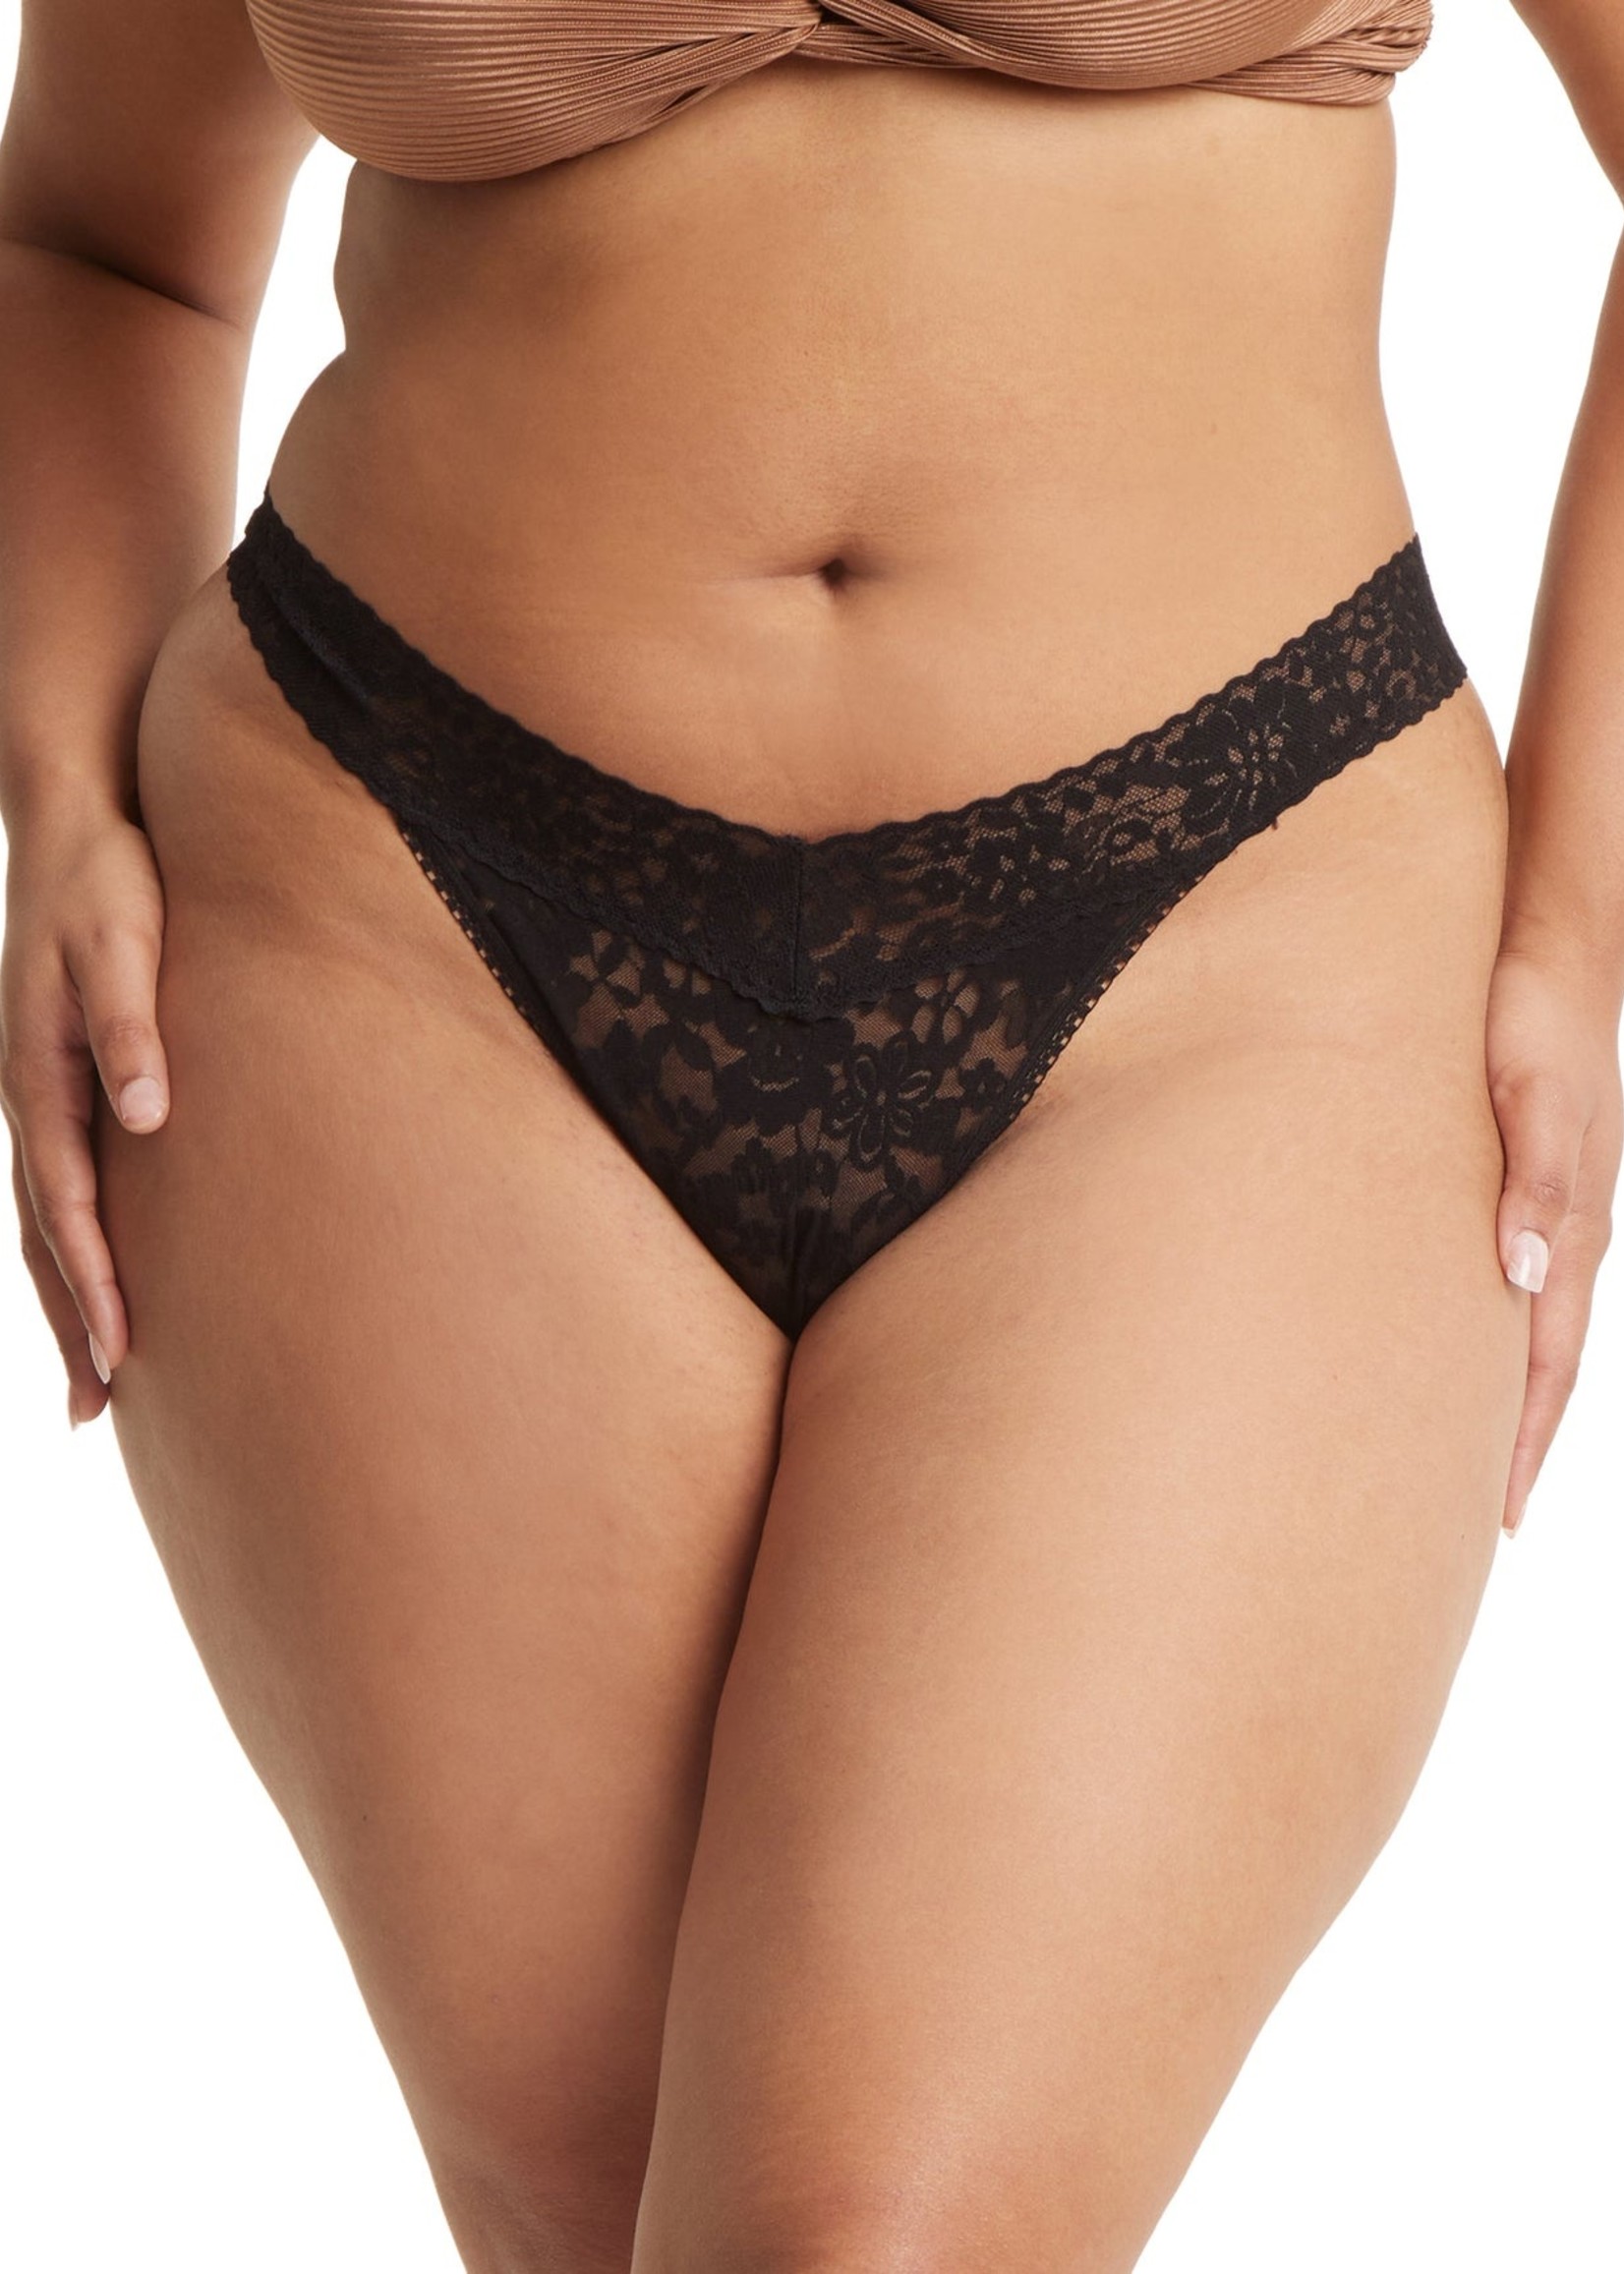 Original rise all-lace thong Plus size (fits 14 to 24), Hanky Panky